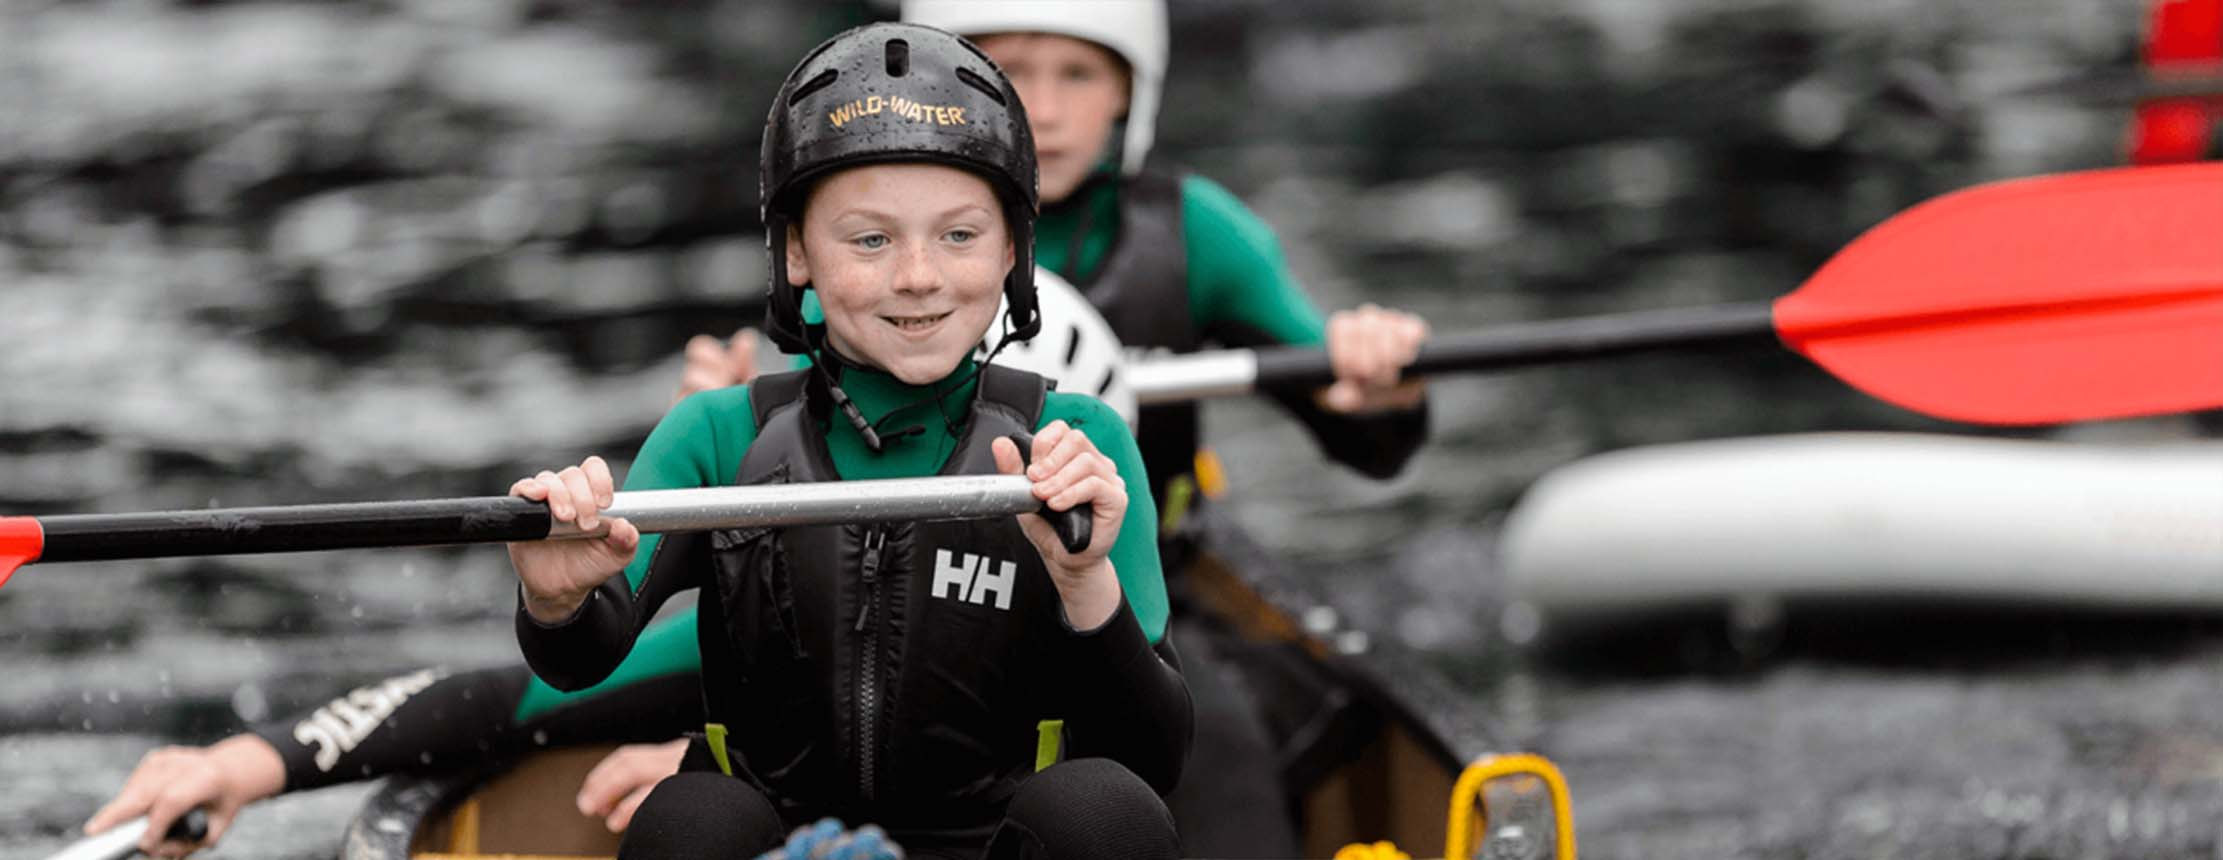 Youngsters canoeing